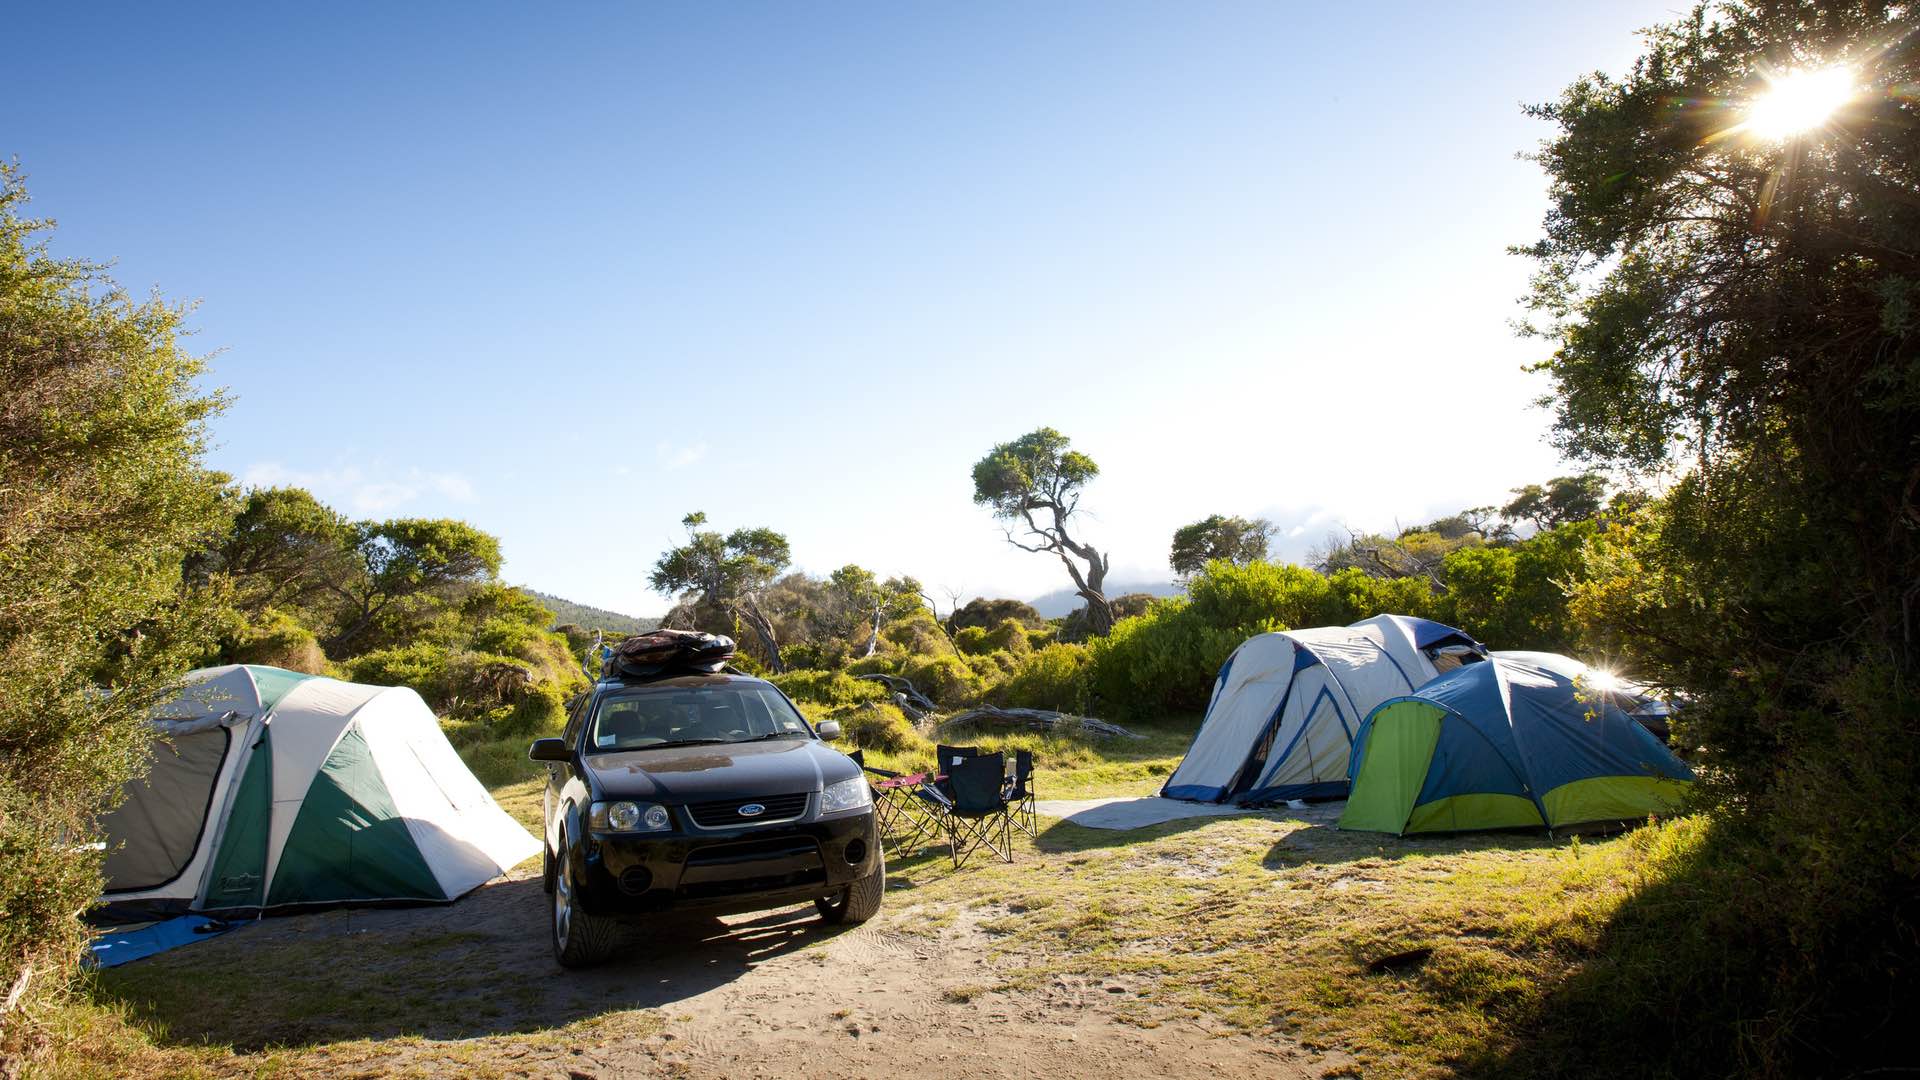 Camping Fees at Victoria's State and National Parks Have Permanently Been Halved